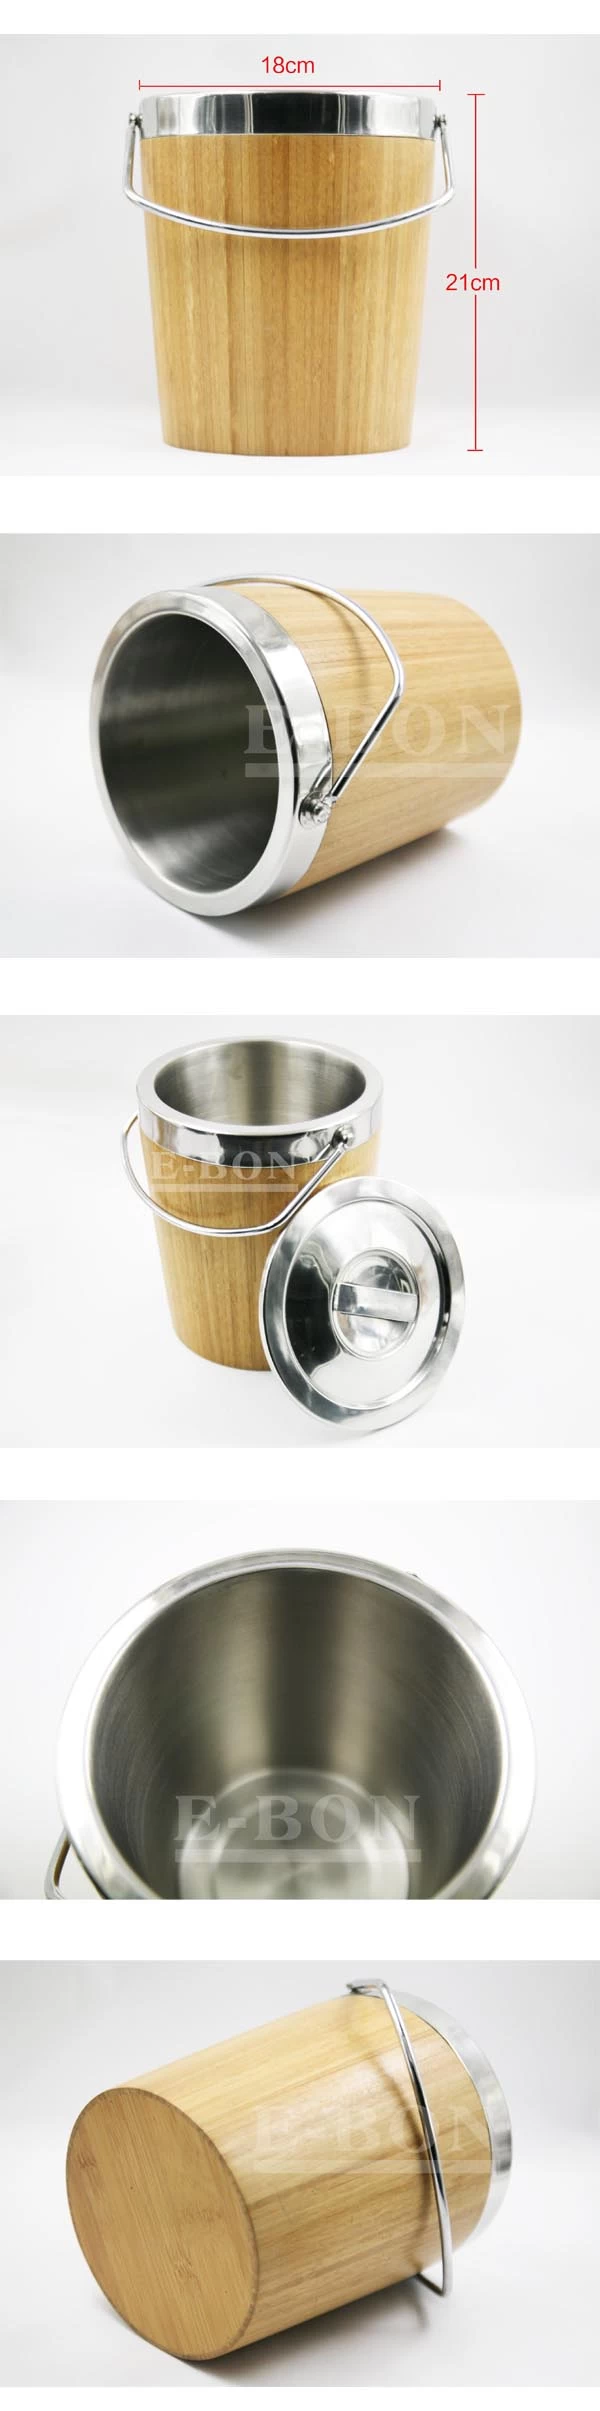 Stainless Steel Ice Bucket with bamboo